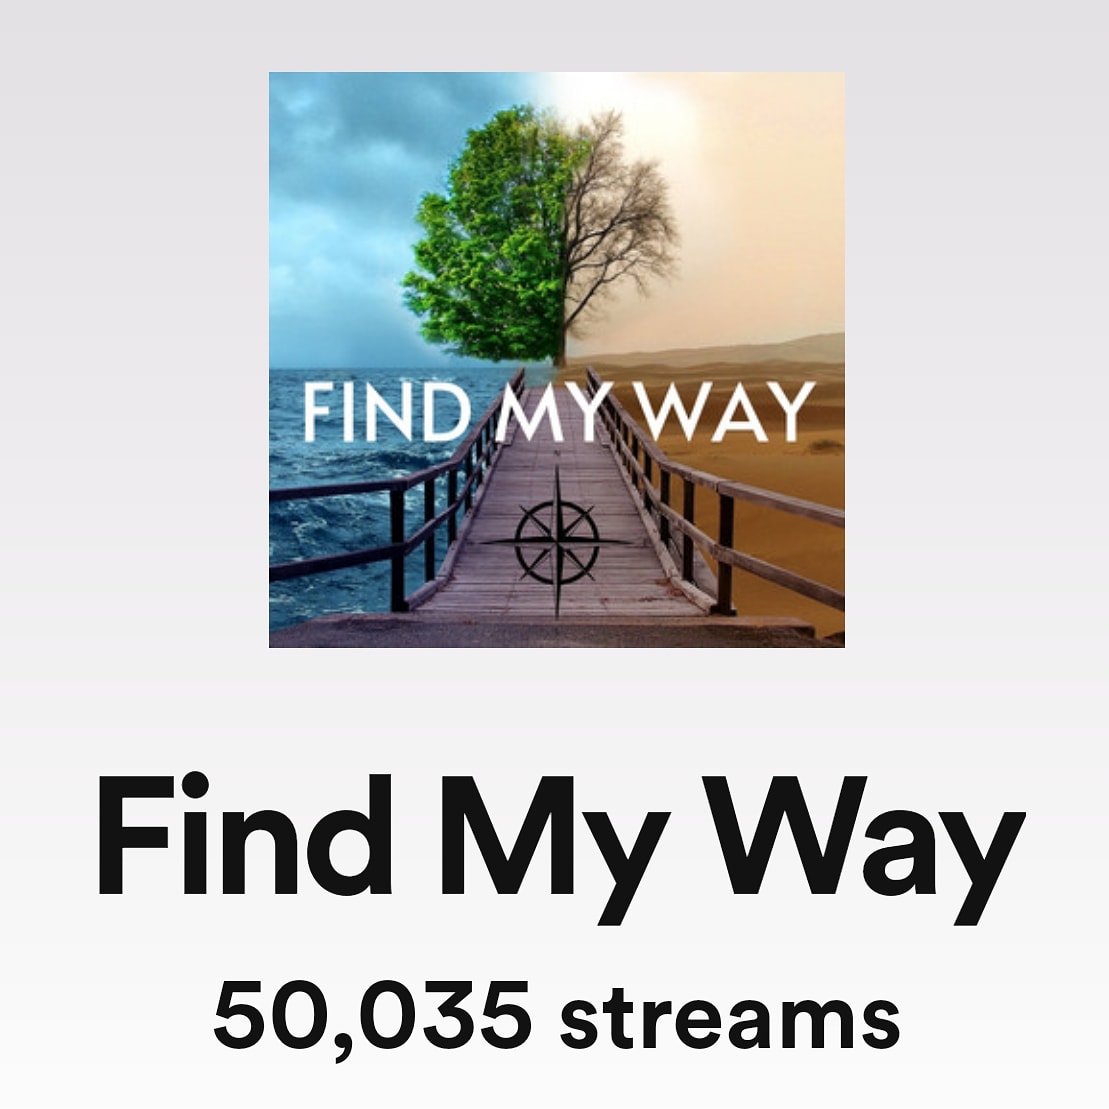 My first song to reach over 50k streams. Happy isn't the word

#musicfestival
#coversband
#musician
#music 
#livemusic 
#guitar 
#funk
#country 
#longlivemusic 
#musicislife 
#idontneedtoretrain
#functionband
#wedding
#creativity
#gig
#festival
#singer
#livemusicscene